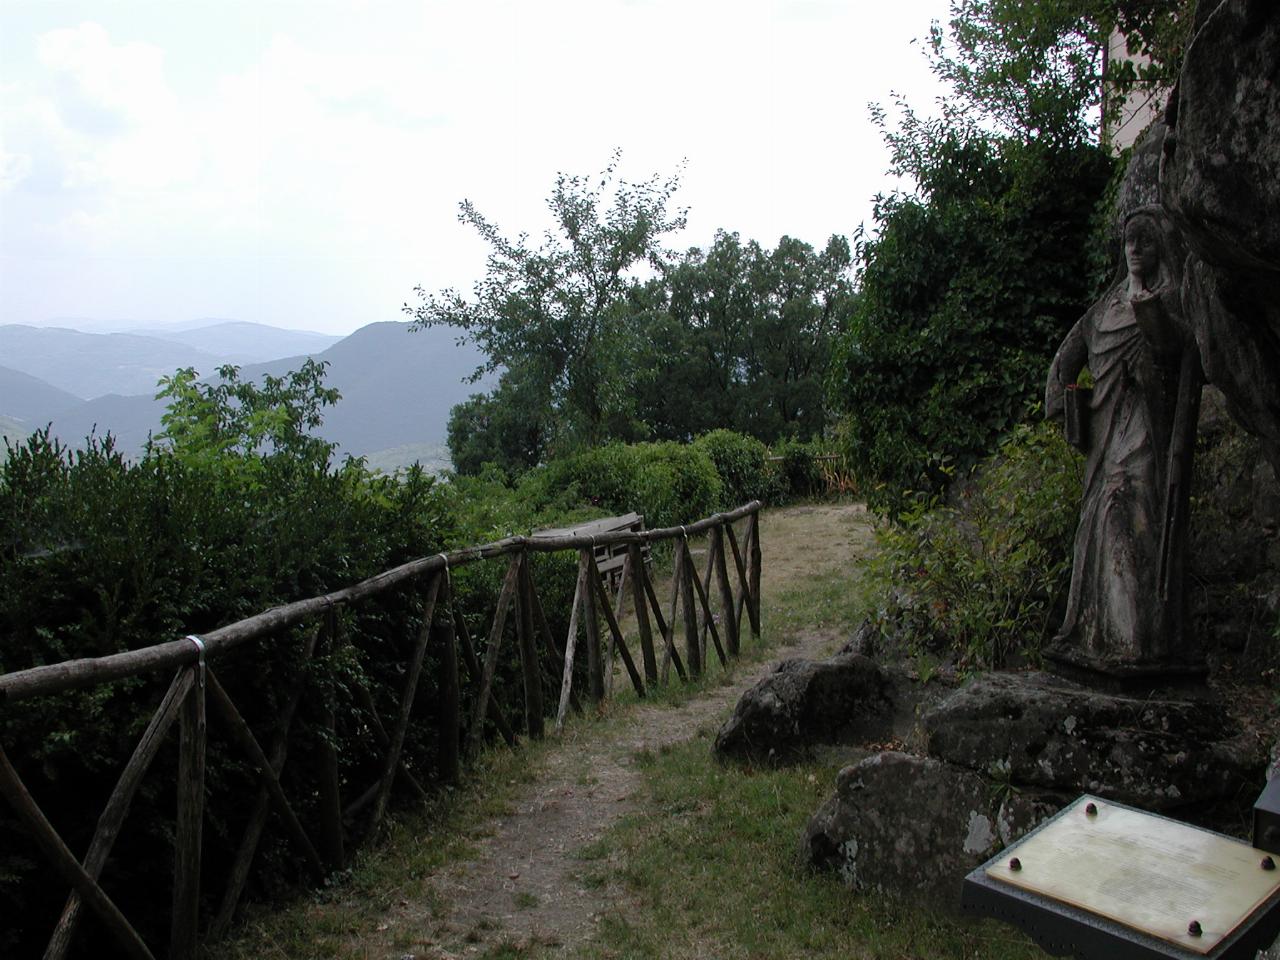 View over the hills from St. Brigid's cave, with statue of St. Brigid on far right